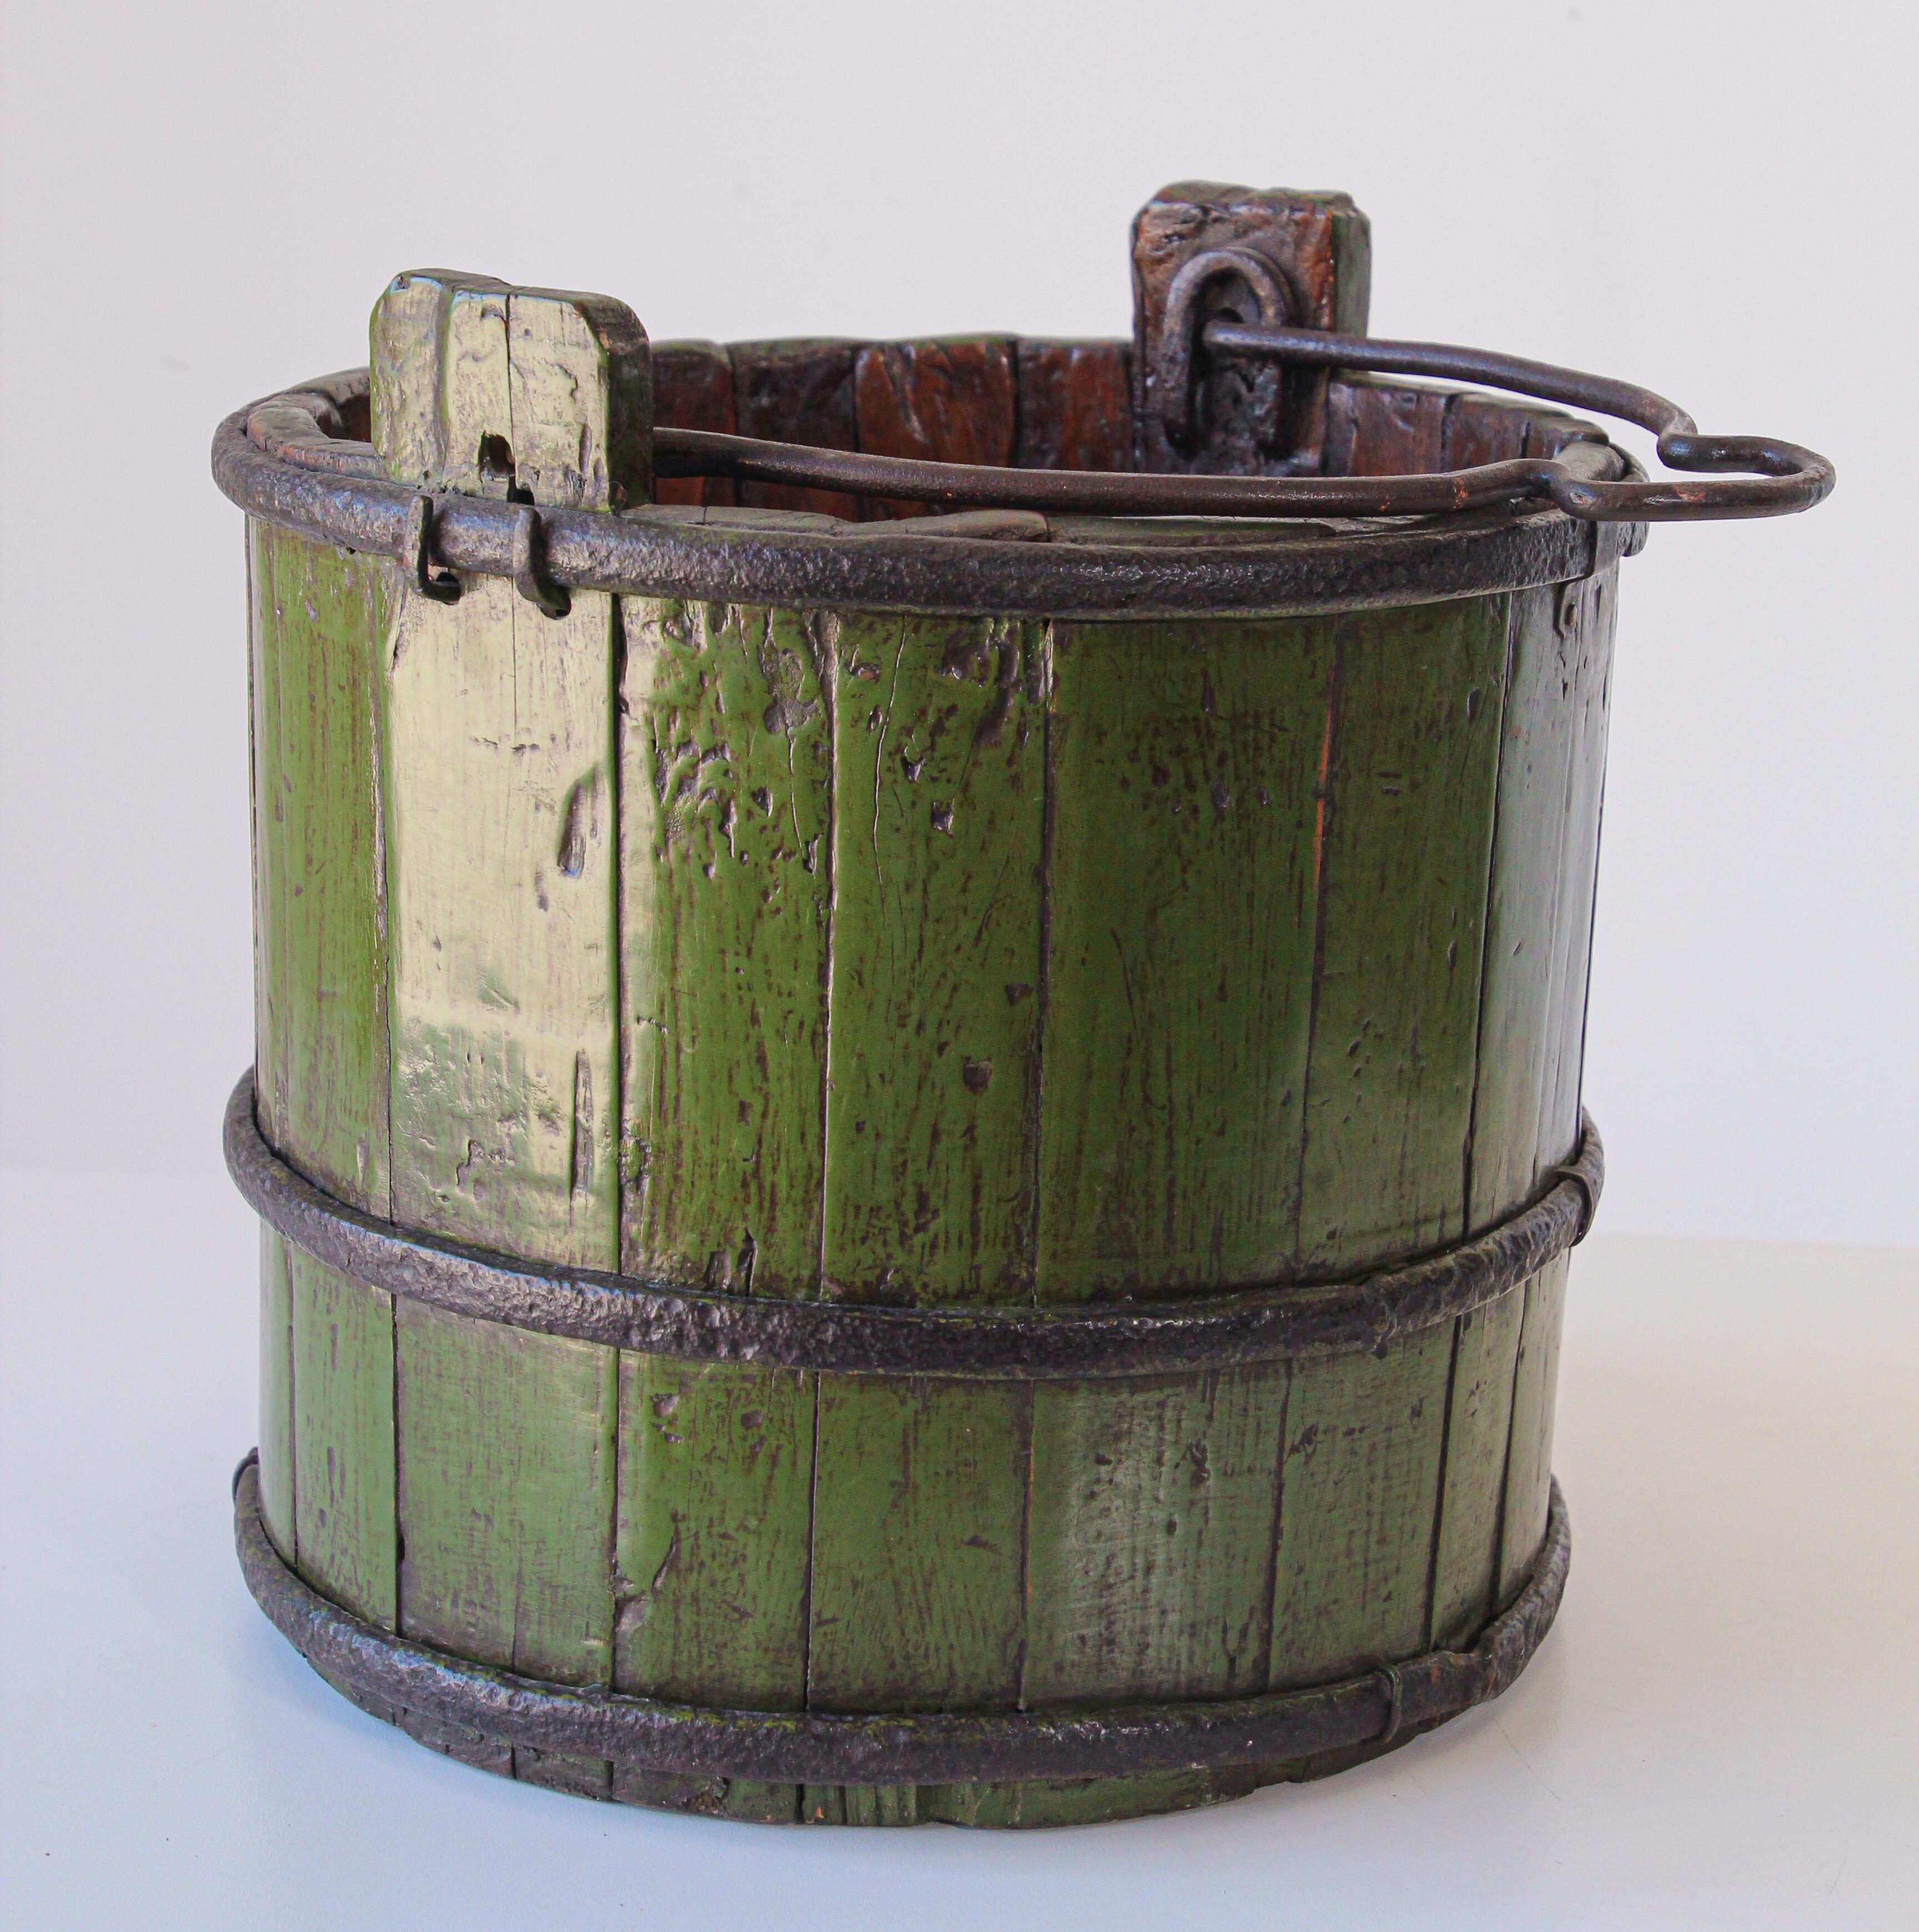 Hand-Crafted Wood Water Bucket with Wrought Iron Bands